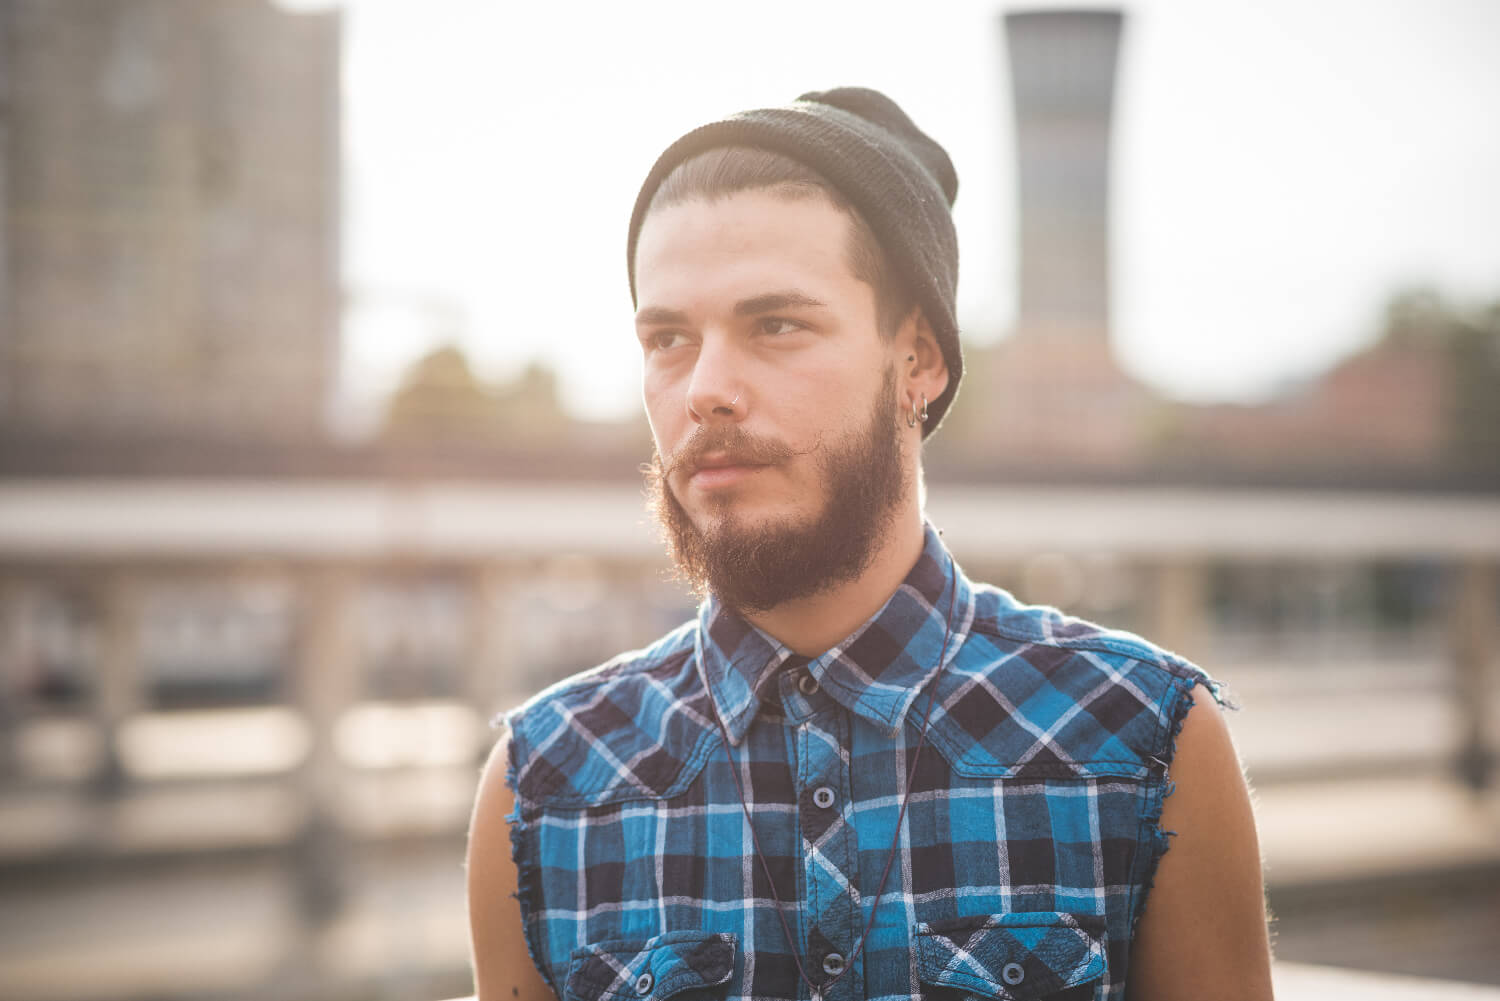 Bearded man outside with cutoff shirt and stocking cap on